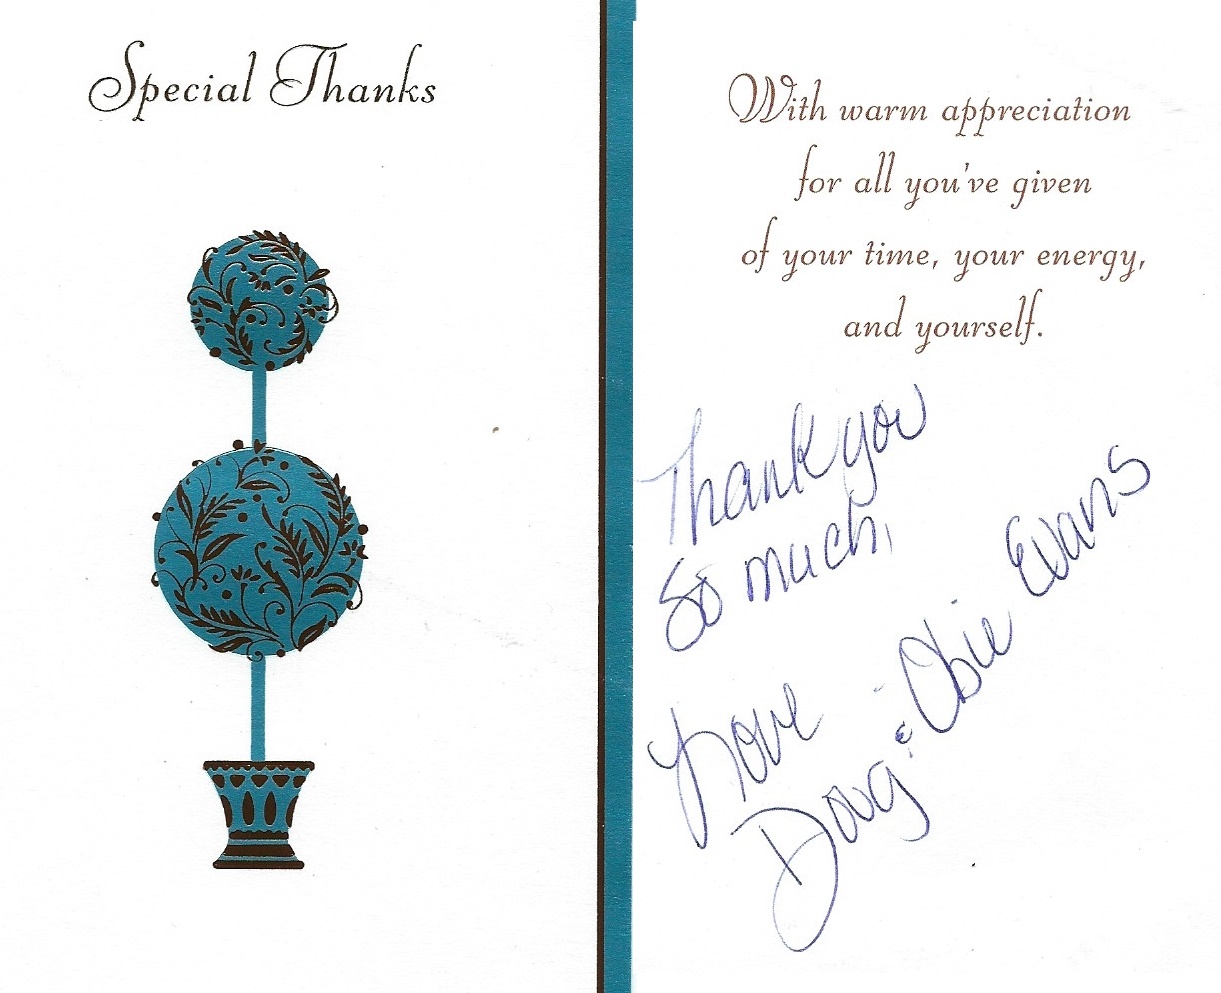 A thank you card from a satisfied customer